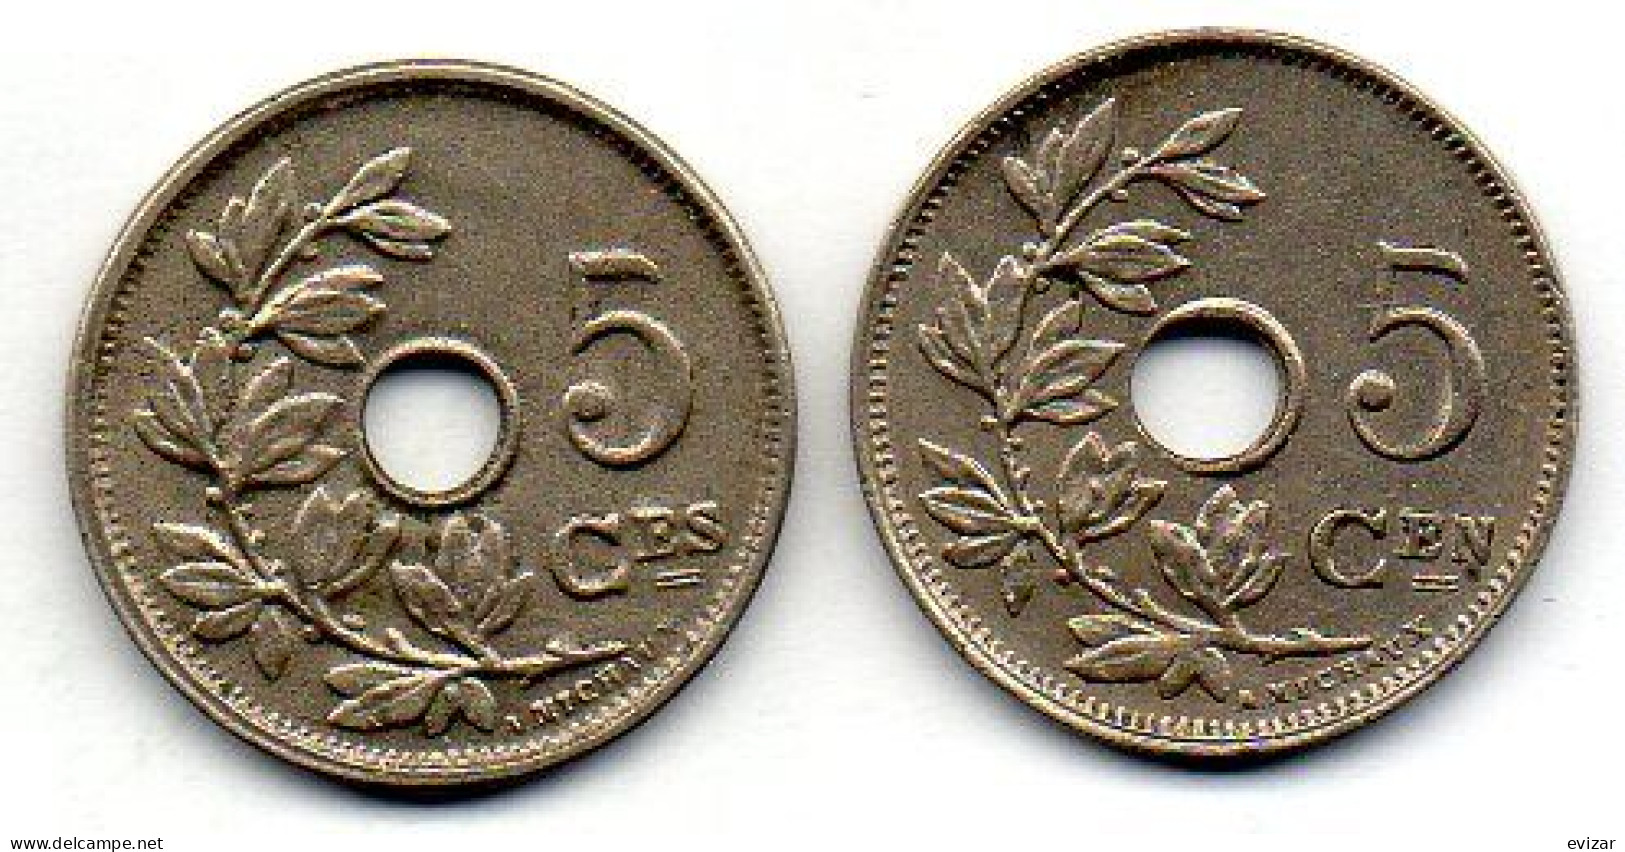 BELGIUM - Set Of Two Coins 5 Centimes, Copper-Nickel, Year 1920, 1924, KM # 66, 67, French & Dutch Legend - 5 Cent